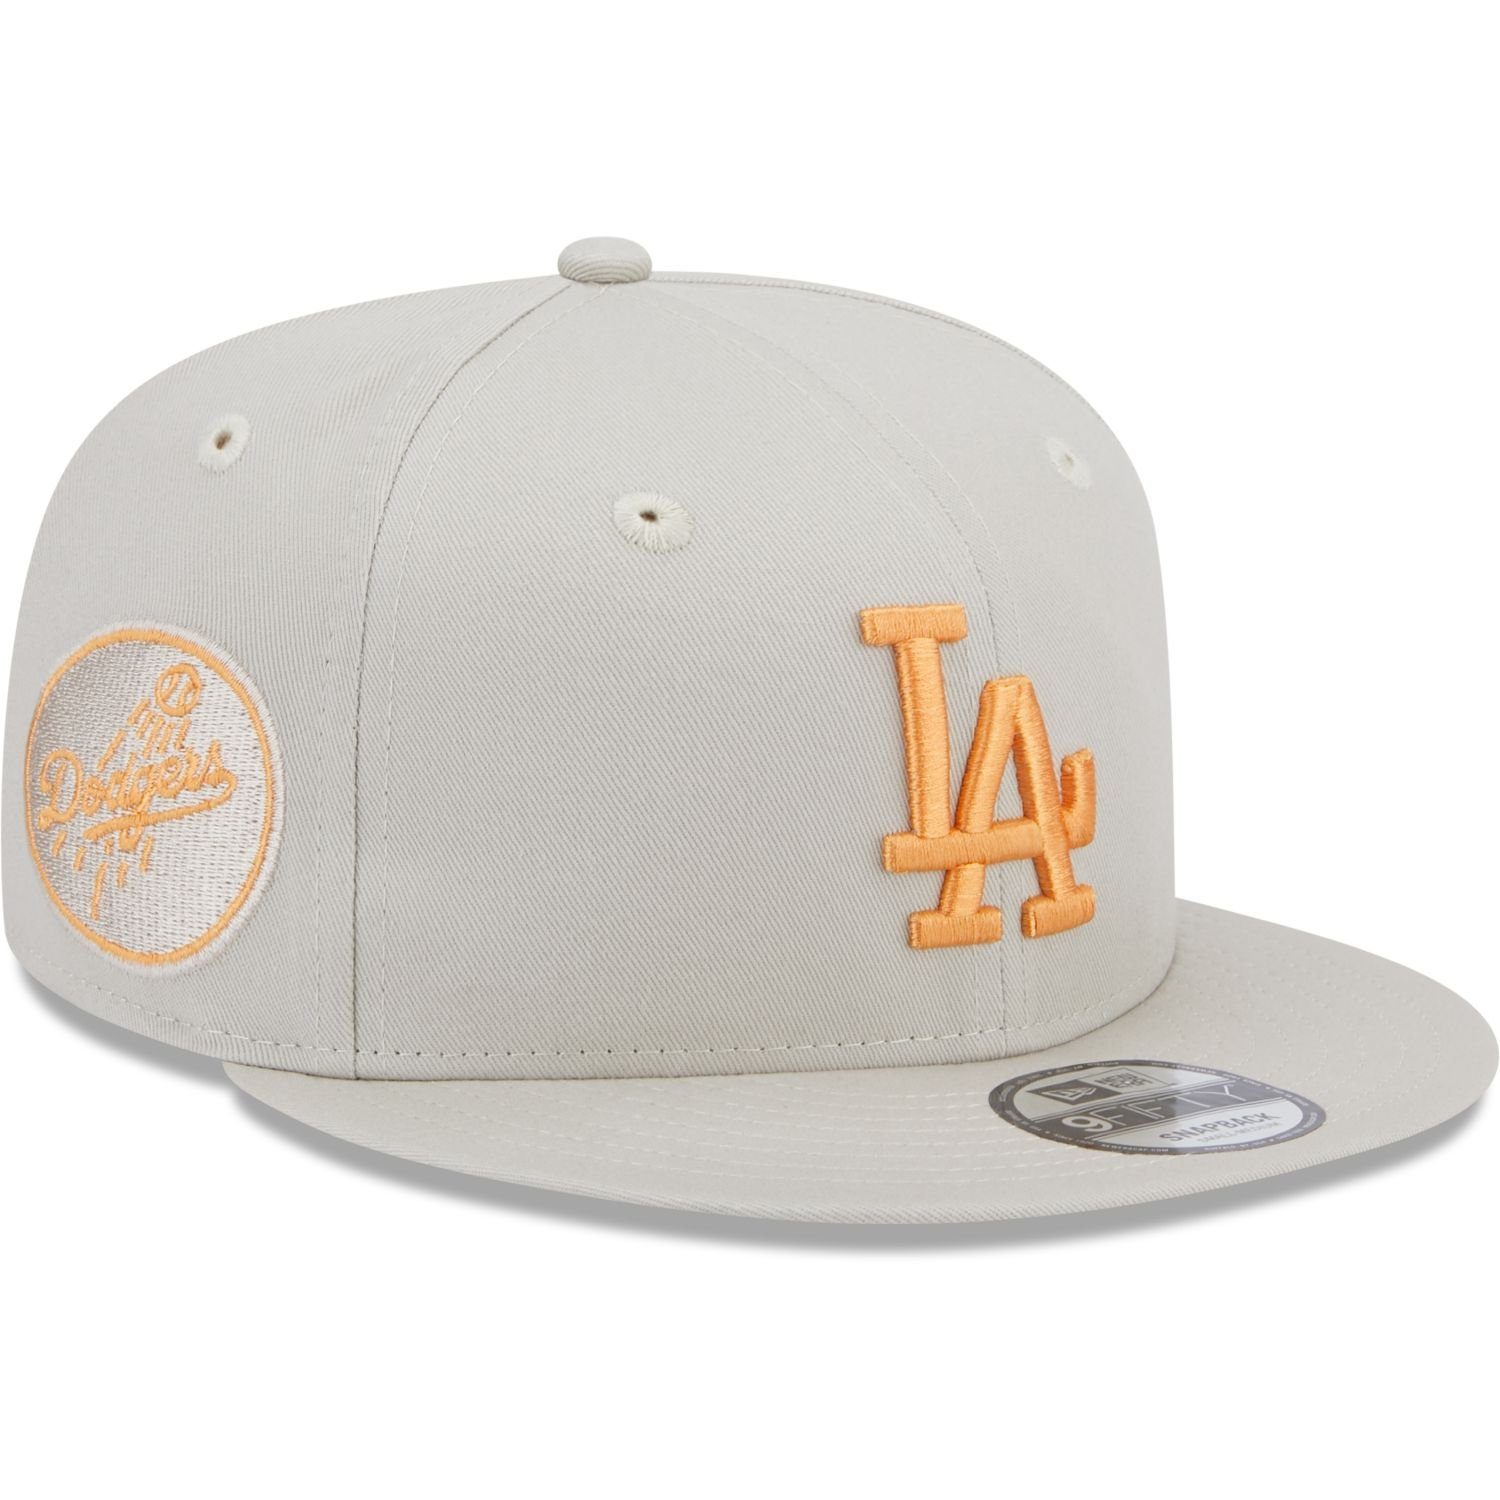 New Era Snapback Cap 9Fifty SIDEPATCH Los Dodgers Angeles